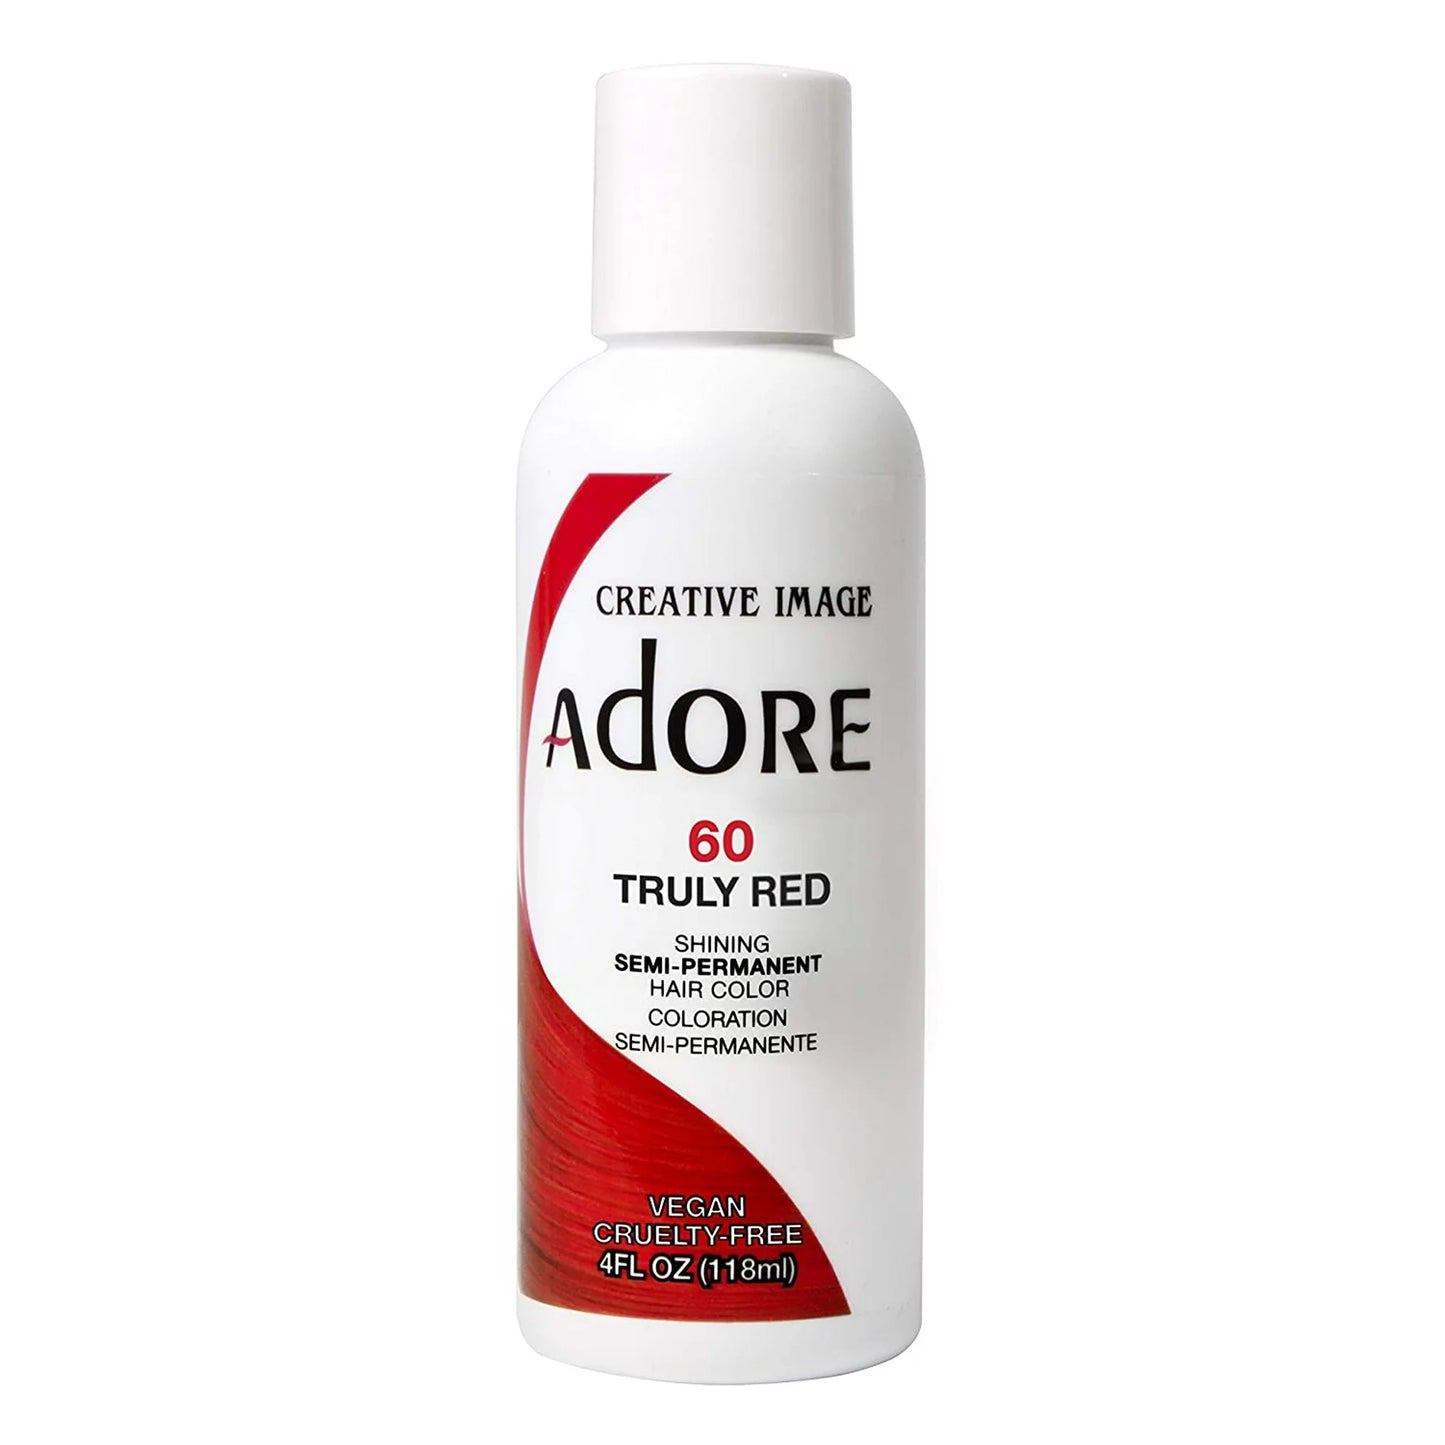 Creative Image Adore Shining Semi Permanent Hair Color 60 Truly Red 4 Fl Oz